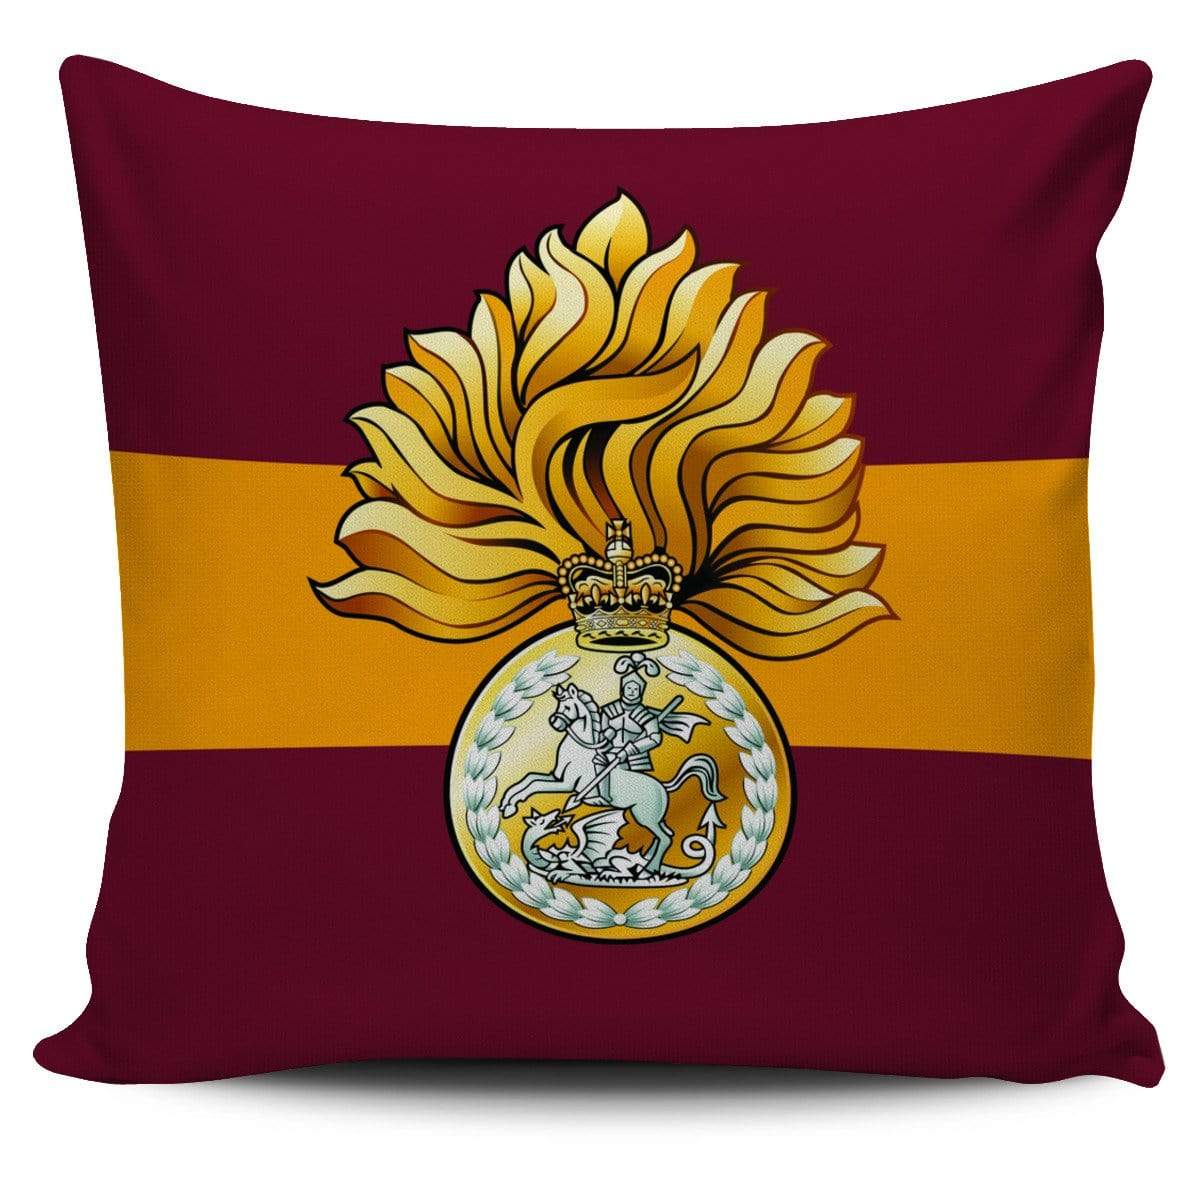 cushion cover Royal Regiment of Fusiliers Cushion Cover Royal Regiment of Fusiliers Cushion Cover